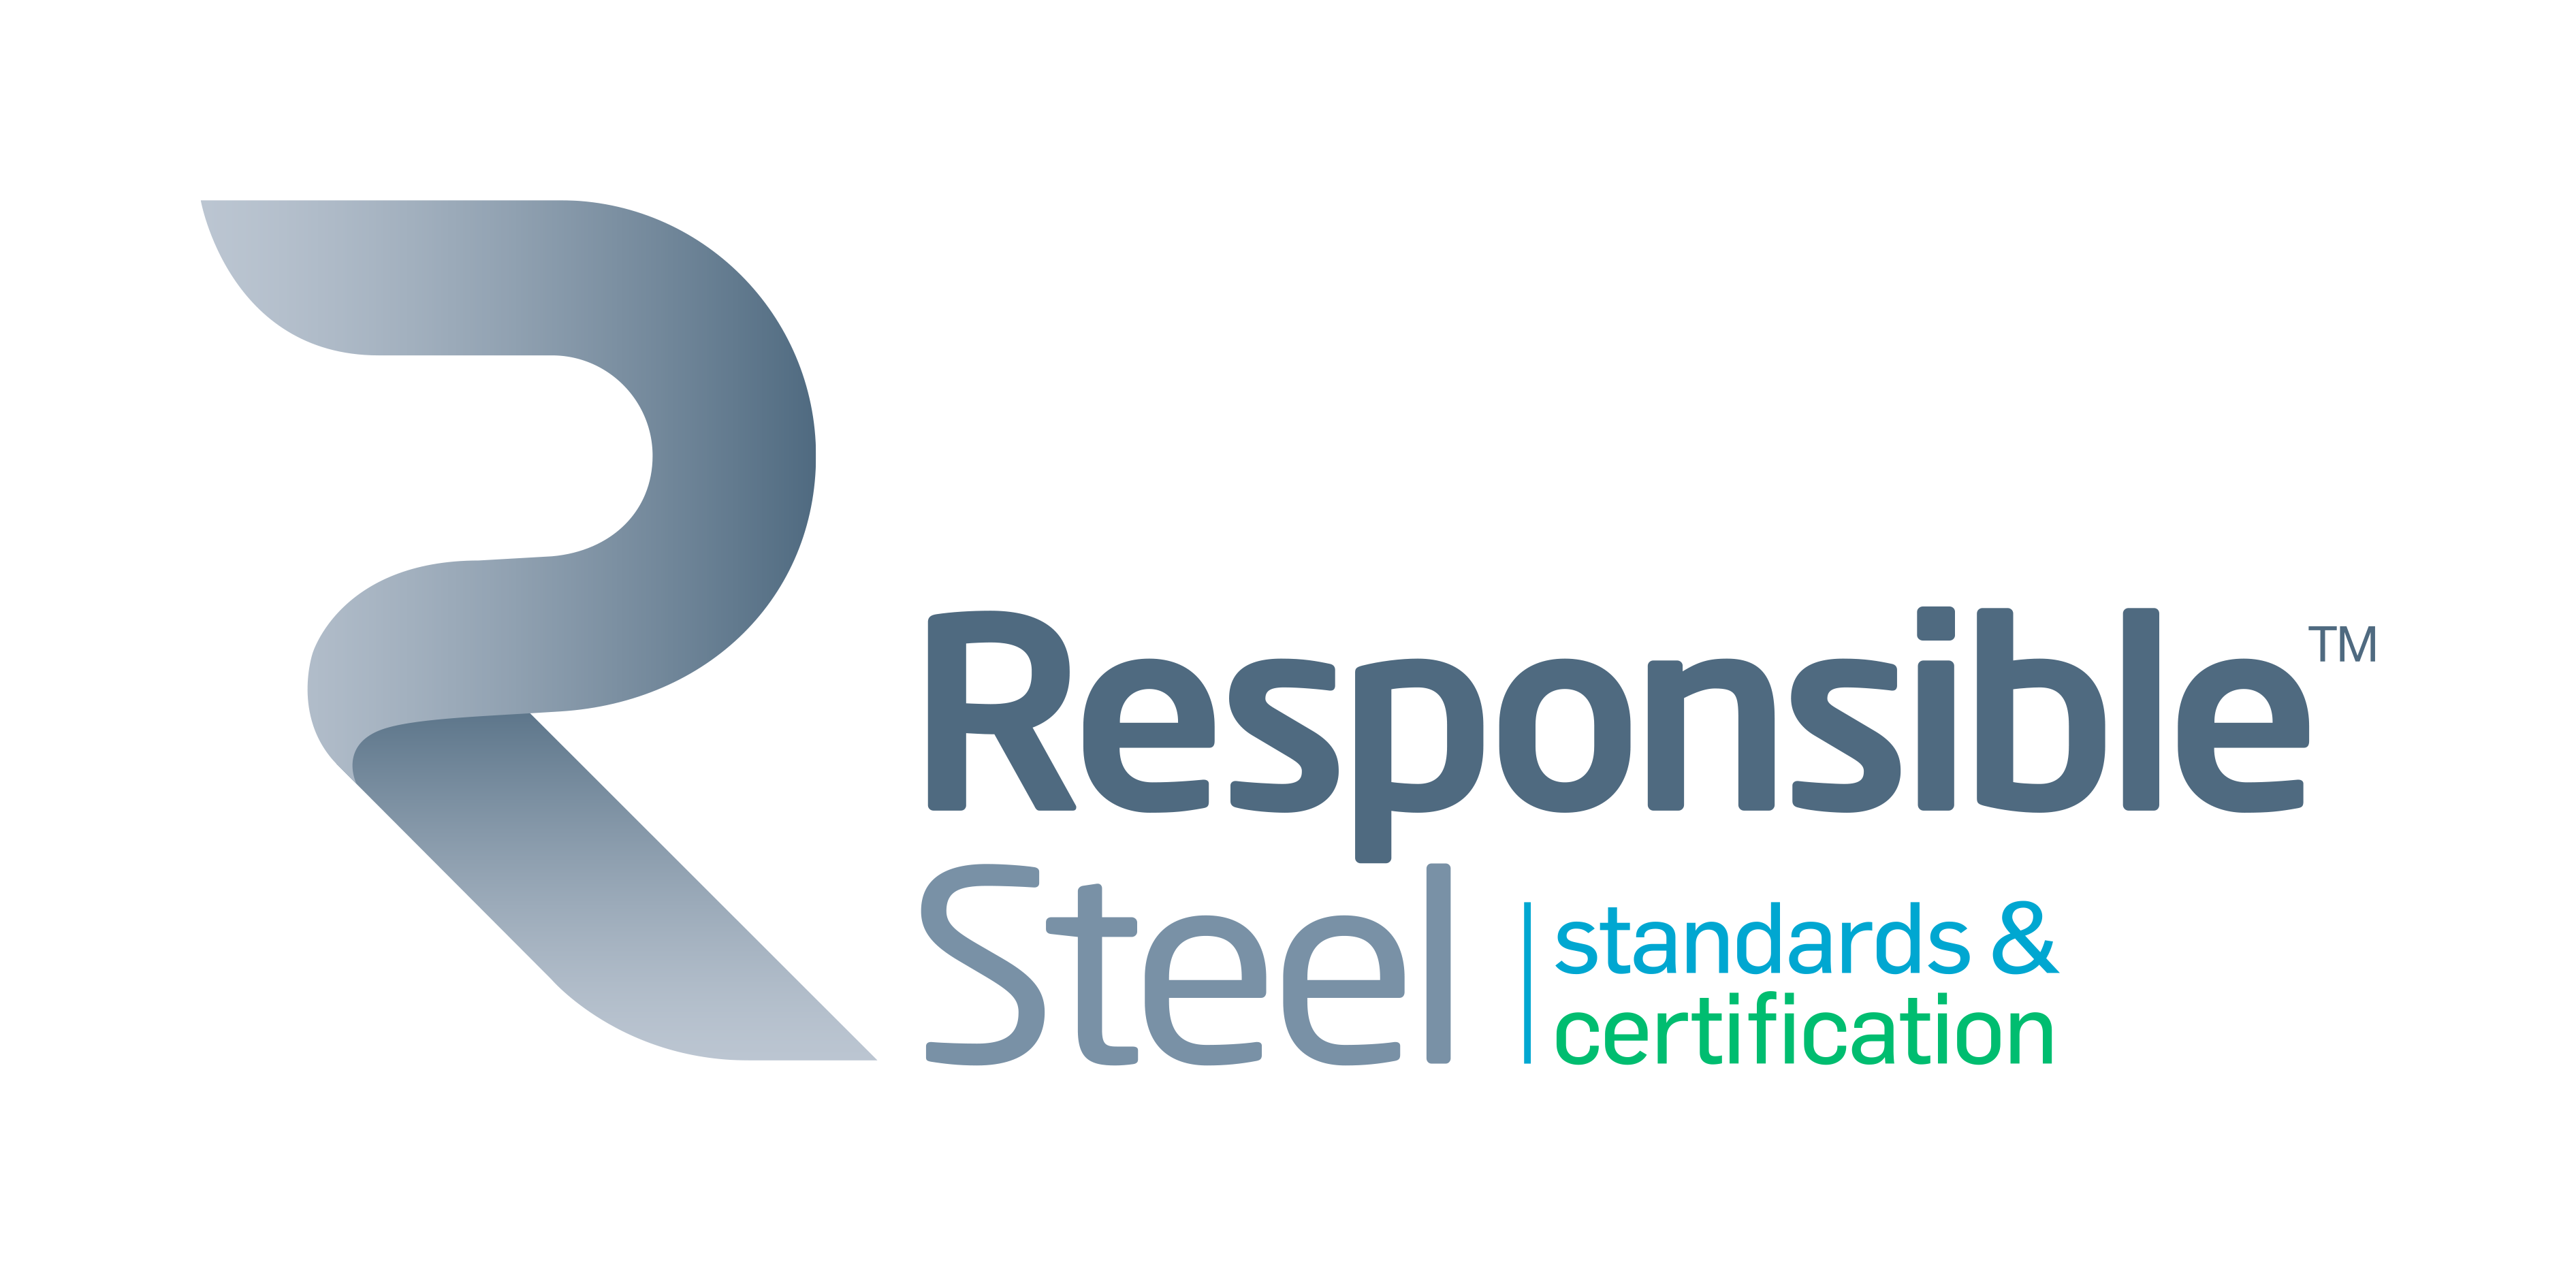 ResponsibleSteel’s Standard incorporated into CRU’s Emissions Analysis Tool